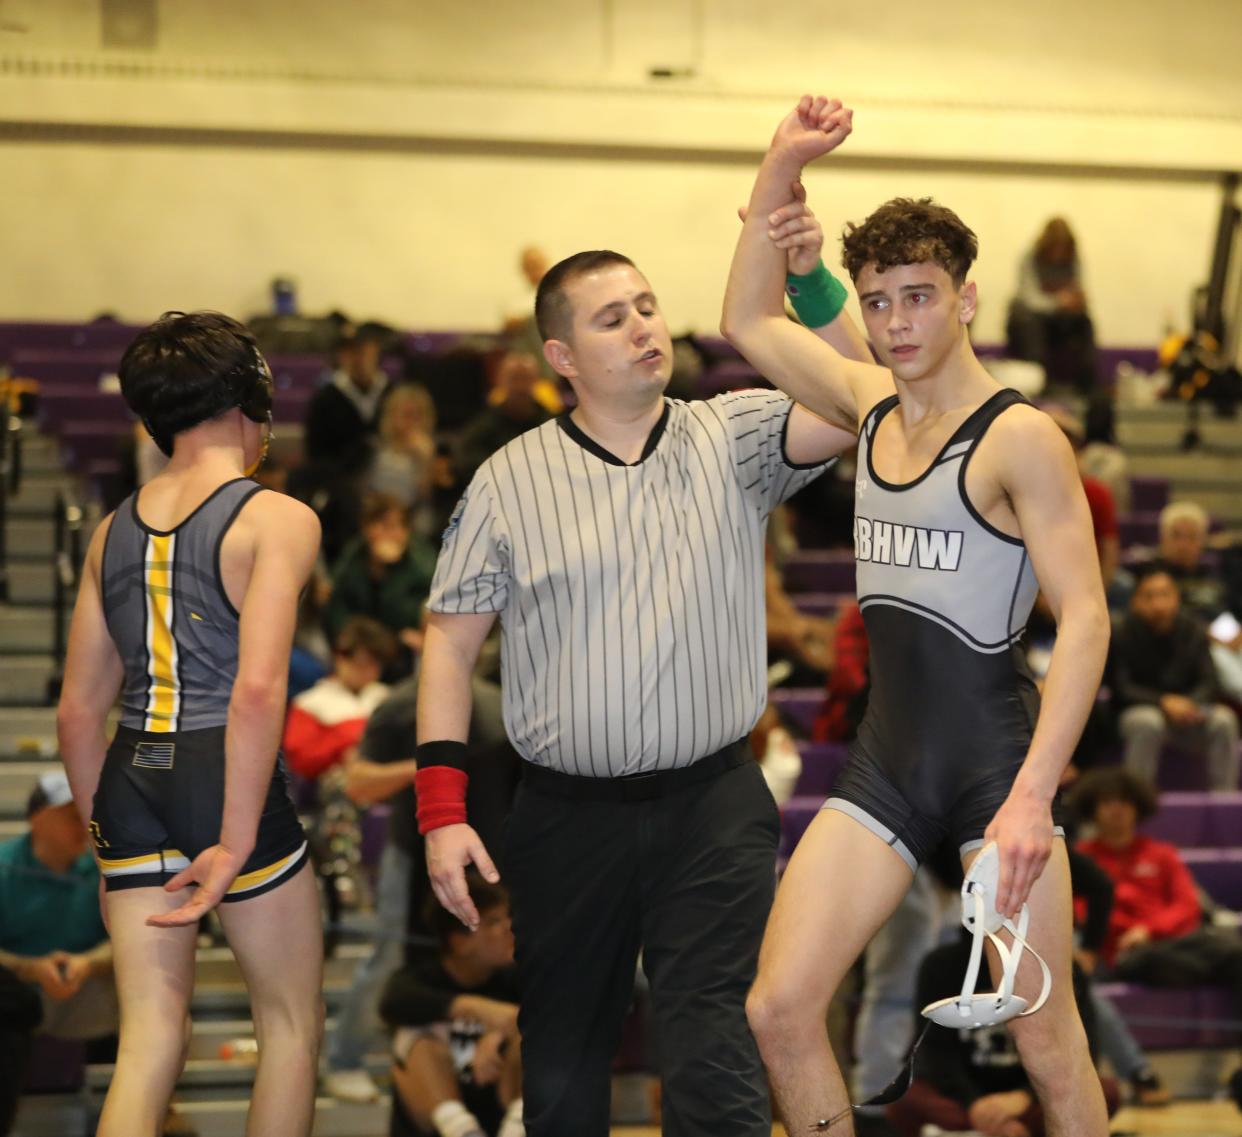 Nick Fortugno from BBHVW defeats Vinny Augello from Commack in the 108 pound weight class, during the 2024 Murphy-Guccione Shoreline Wrestling Classic at New Rochelle High School, Jan. 6, 2024.